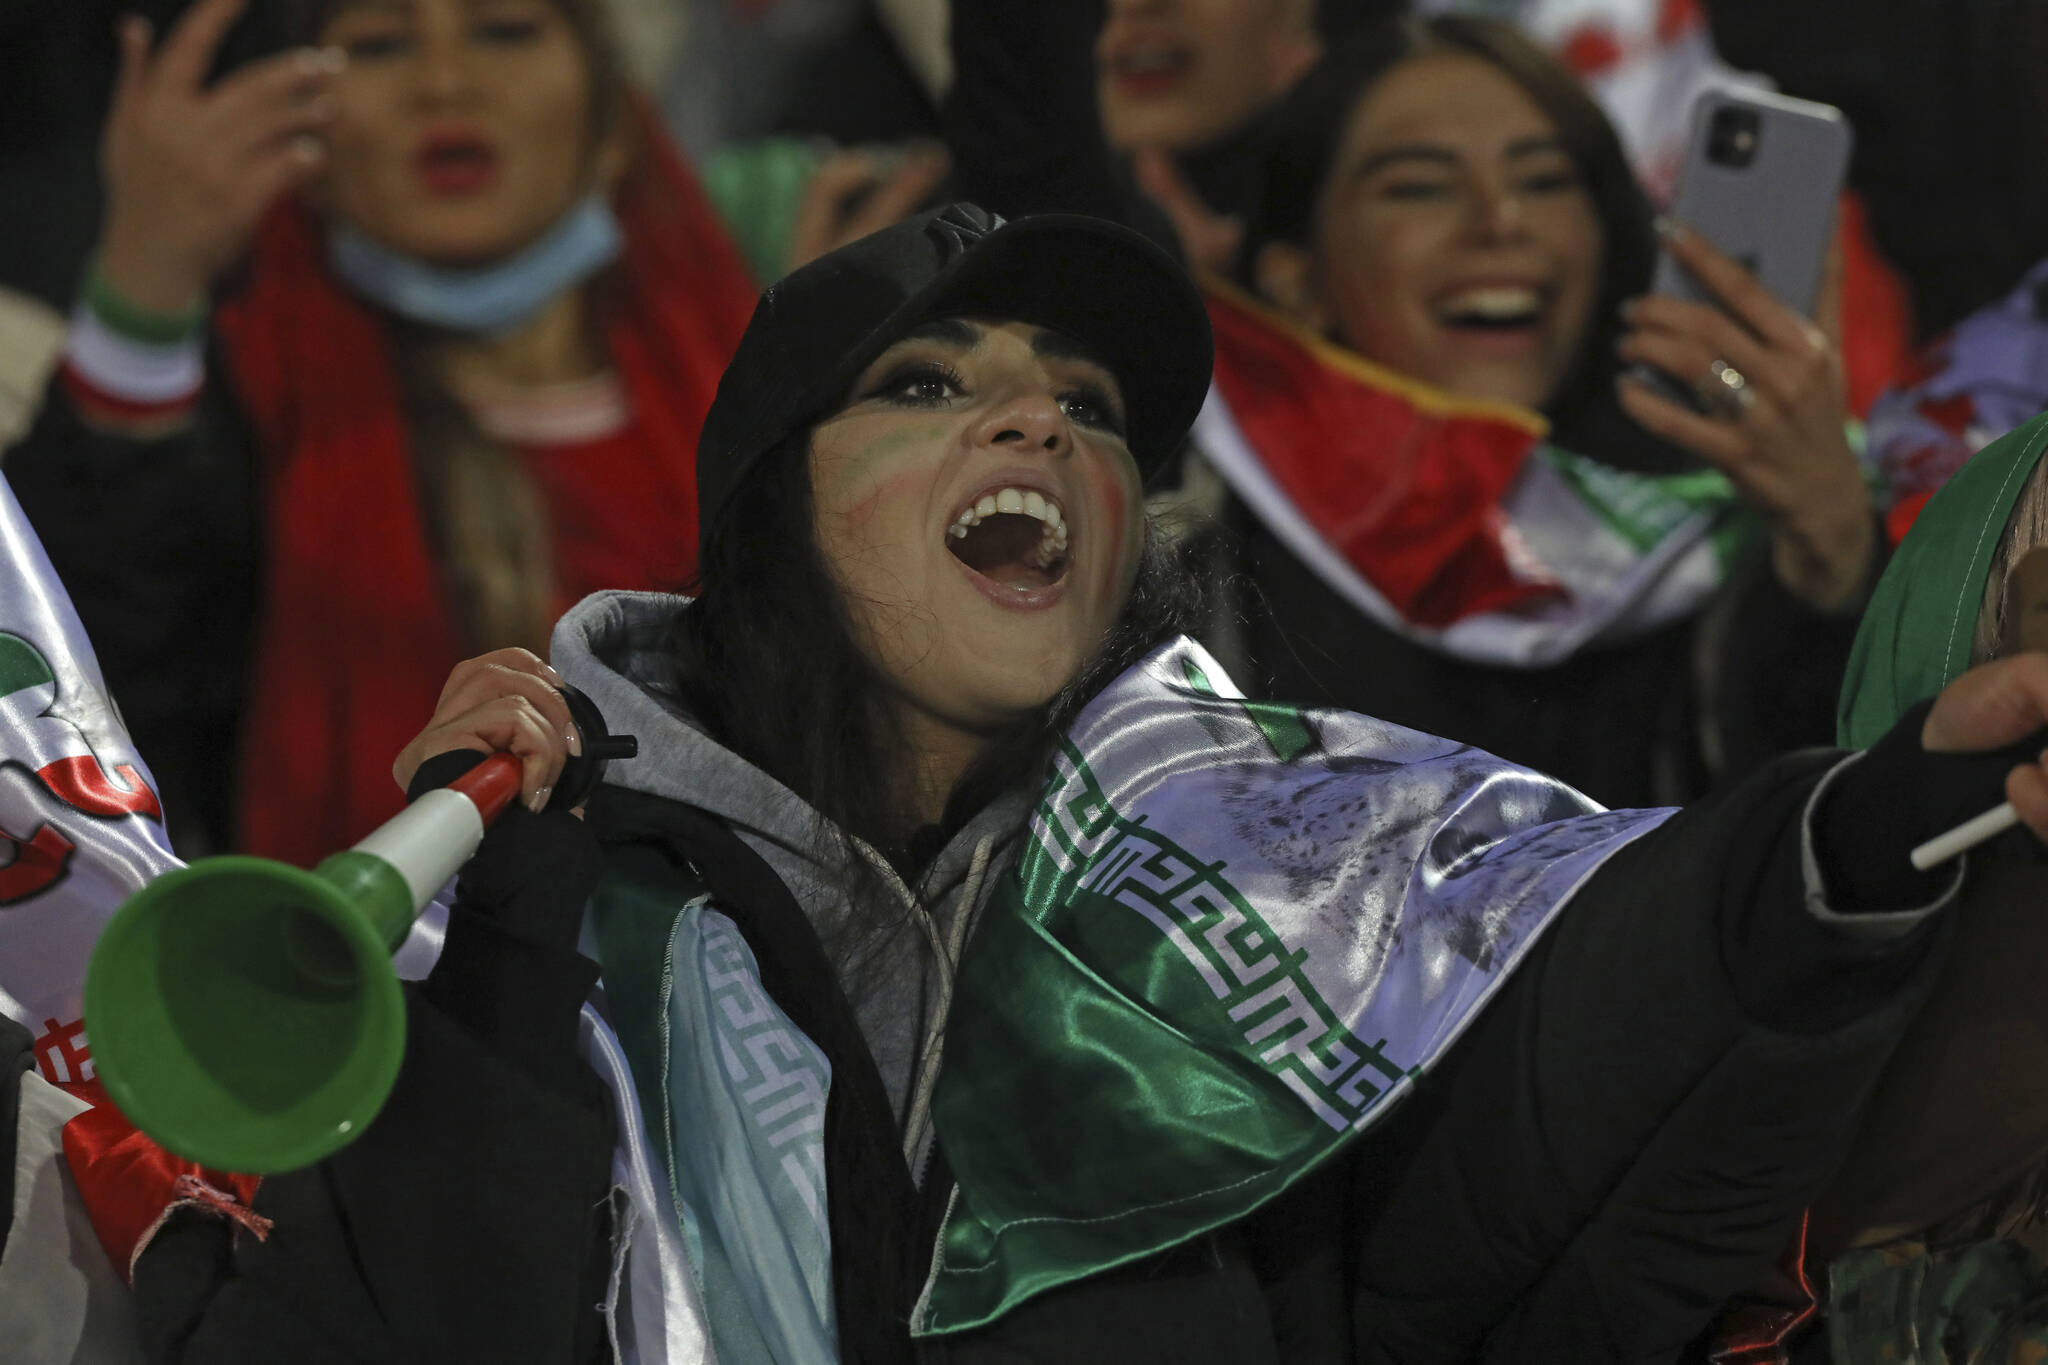 A female Iranian fan cheers after the final whistle during a soccer match of her national team with Iraq in 2022 World Cup qualifiers, at the Azadi stadium in Tehran, Iran, Thursday, Jan. 27, 2022. Iranian authorities allowed women to watch a football match at the stadium as hardliners have long opposed the decision of the government. Iran became the first team from Asia to qualify for this year’s World Cup in Qatar with a 1-0 win over Iraq. (AP Photo/Vahid Salemi)